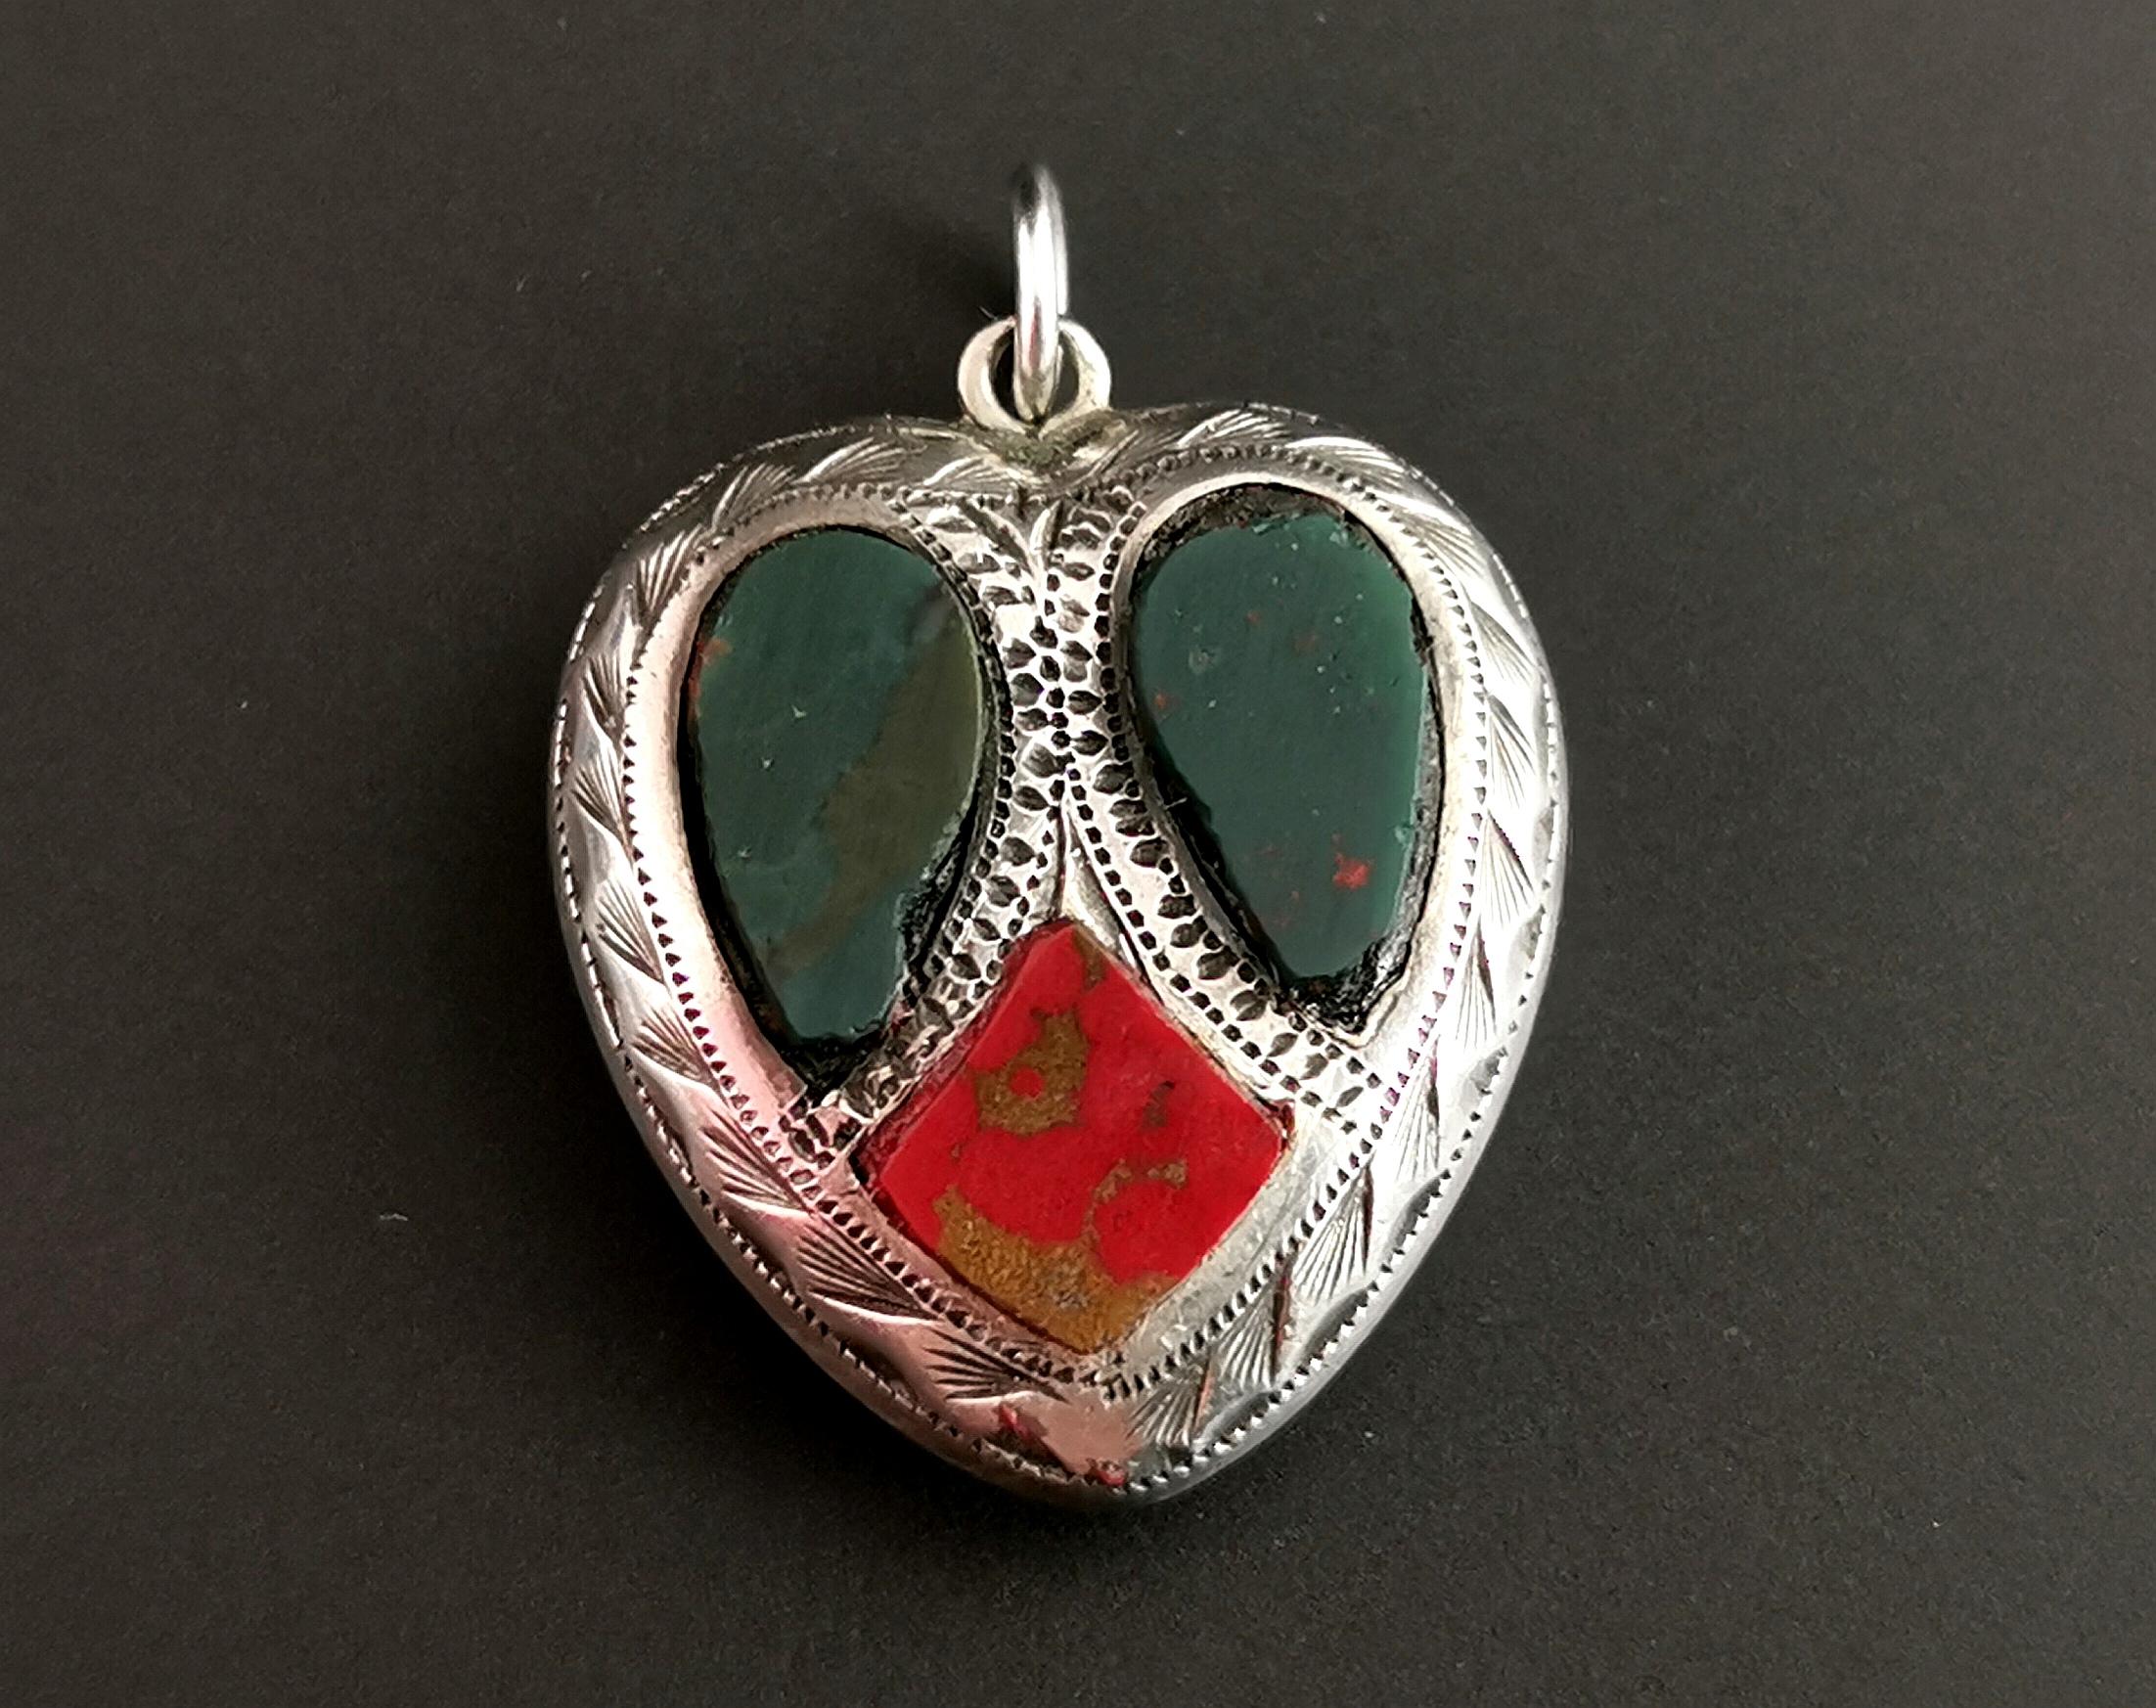 A beautiful little antique Scottish agate and Silver heart pendant.

It is a puffy silver heart with light engraving and a smooth polished finish to the reverse.

The front of the pendant is set to the front with Red Jasper and bloodstone with two